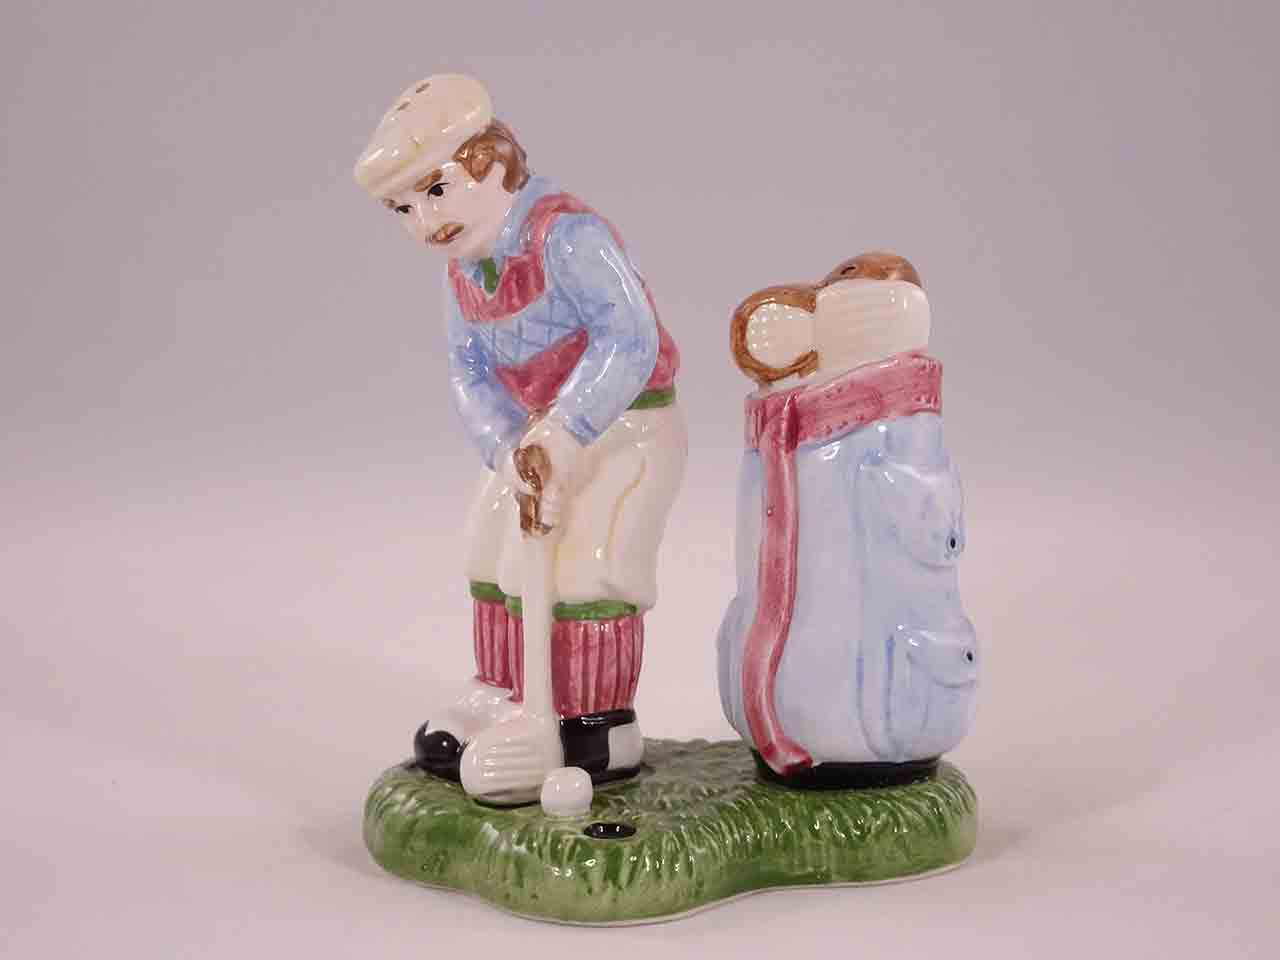 Series of men and their hobbies salt and pepper shakers - golfer